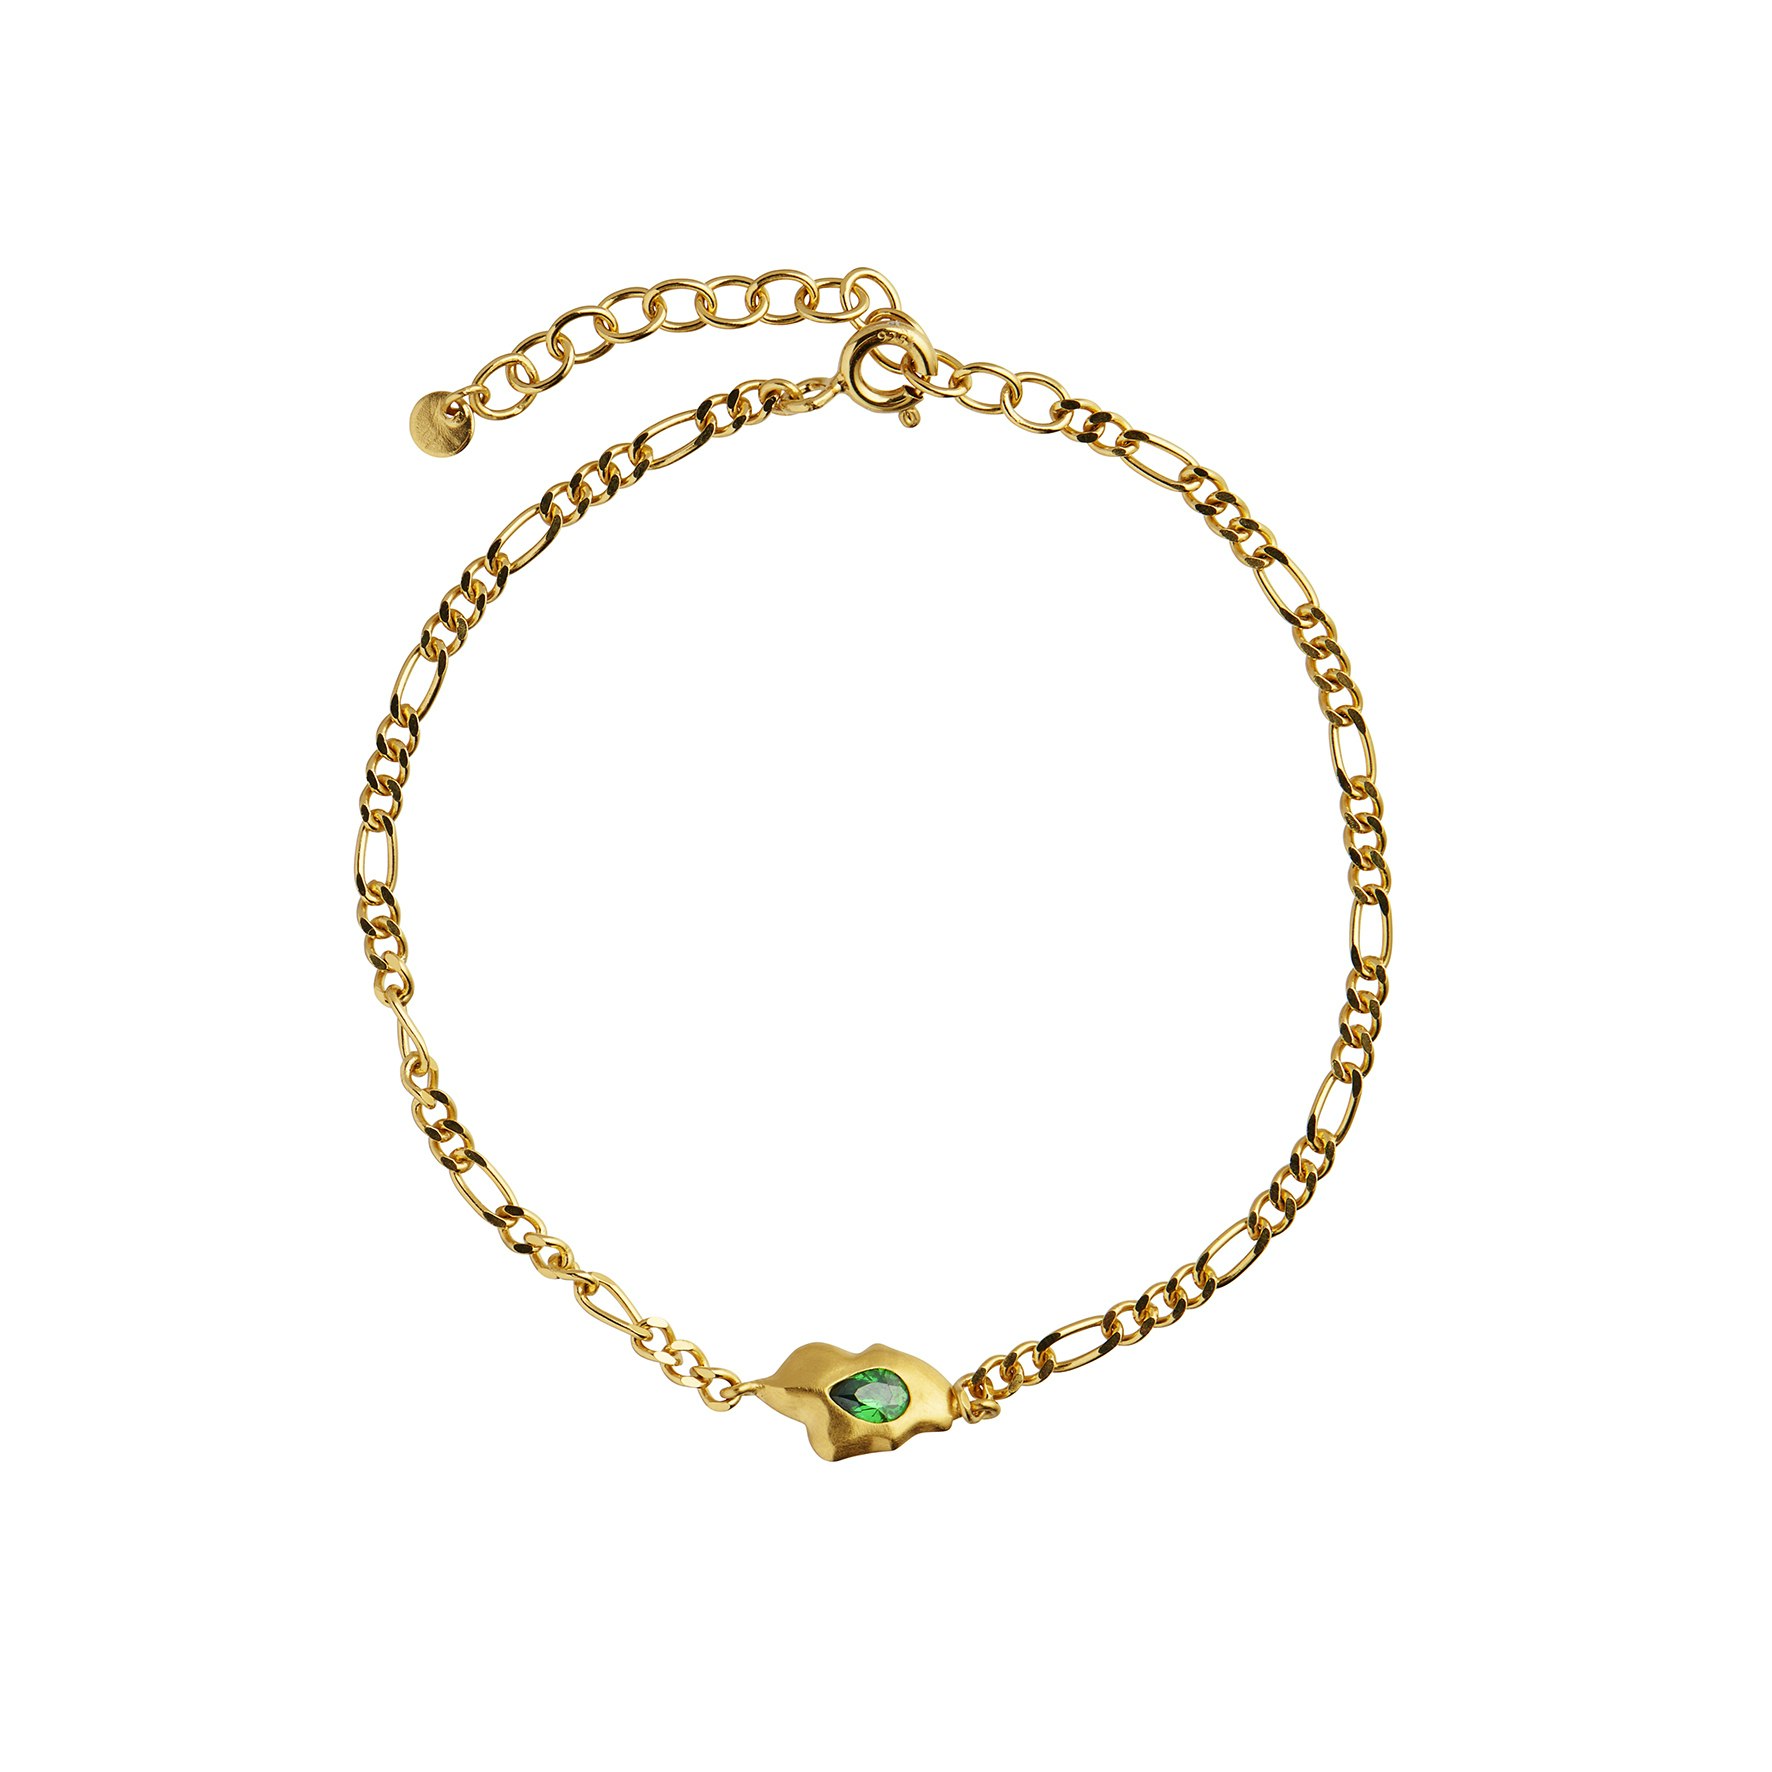 Glimpse Figaro Bracelet With Green Stone van STINE A Jewelry in Verguld-Zilver Sterling 925